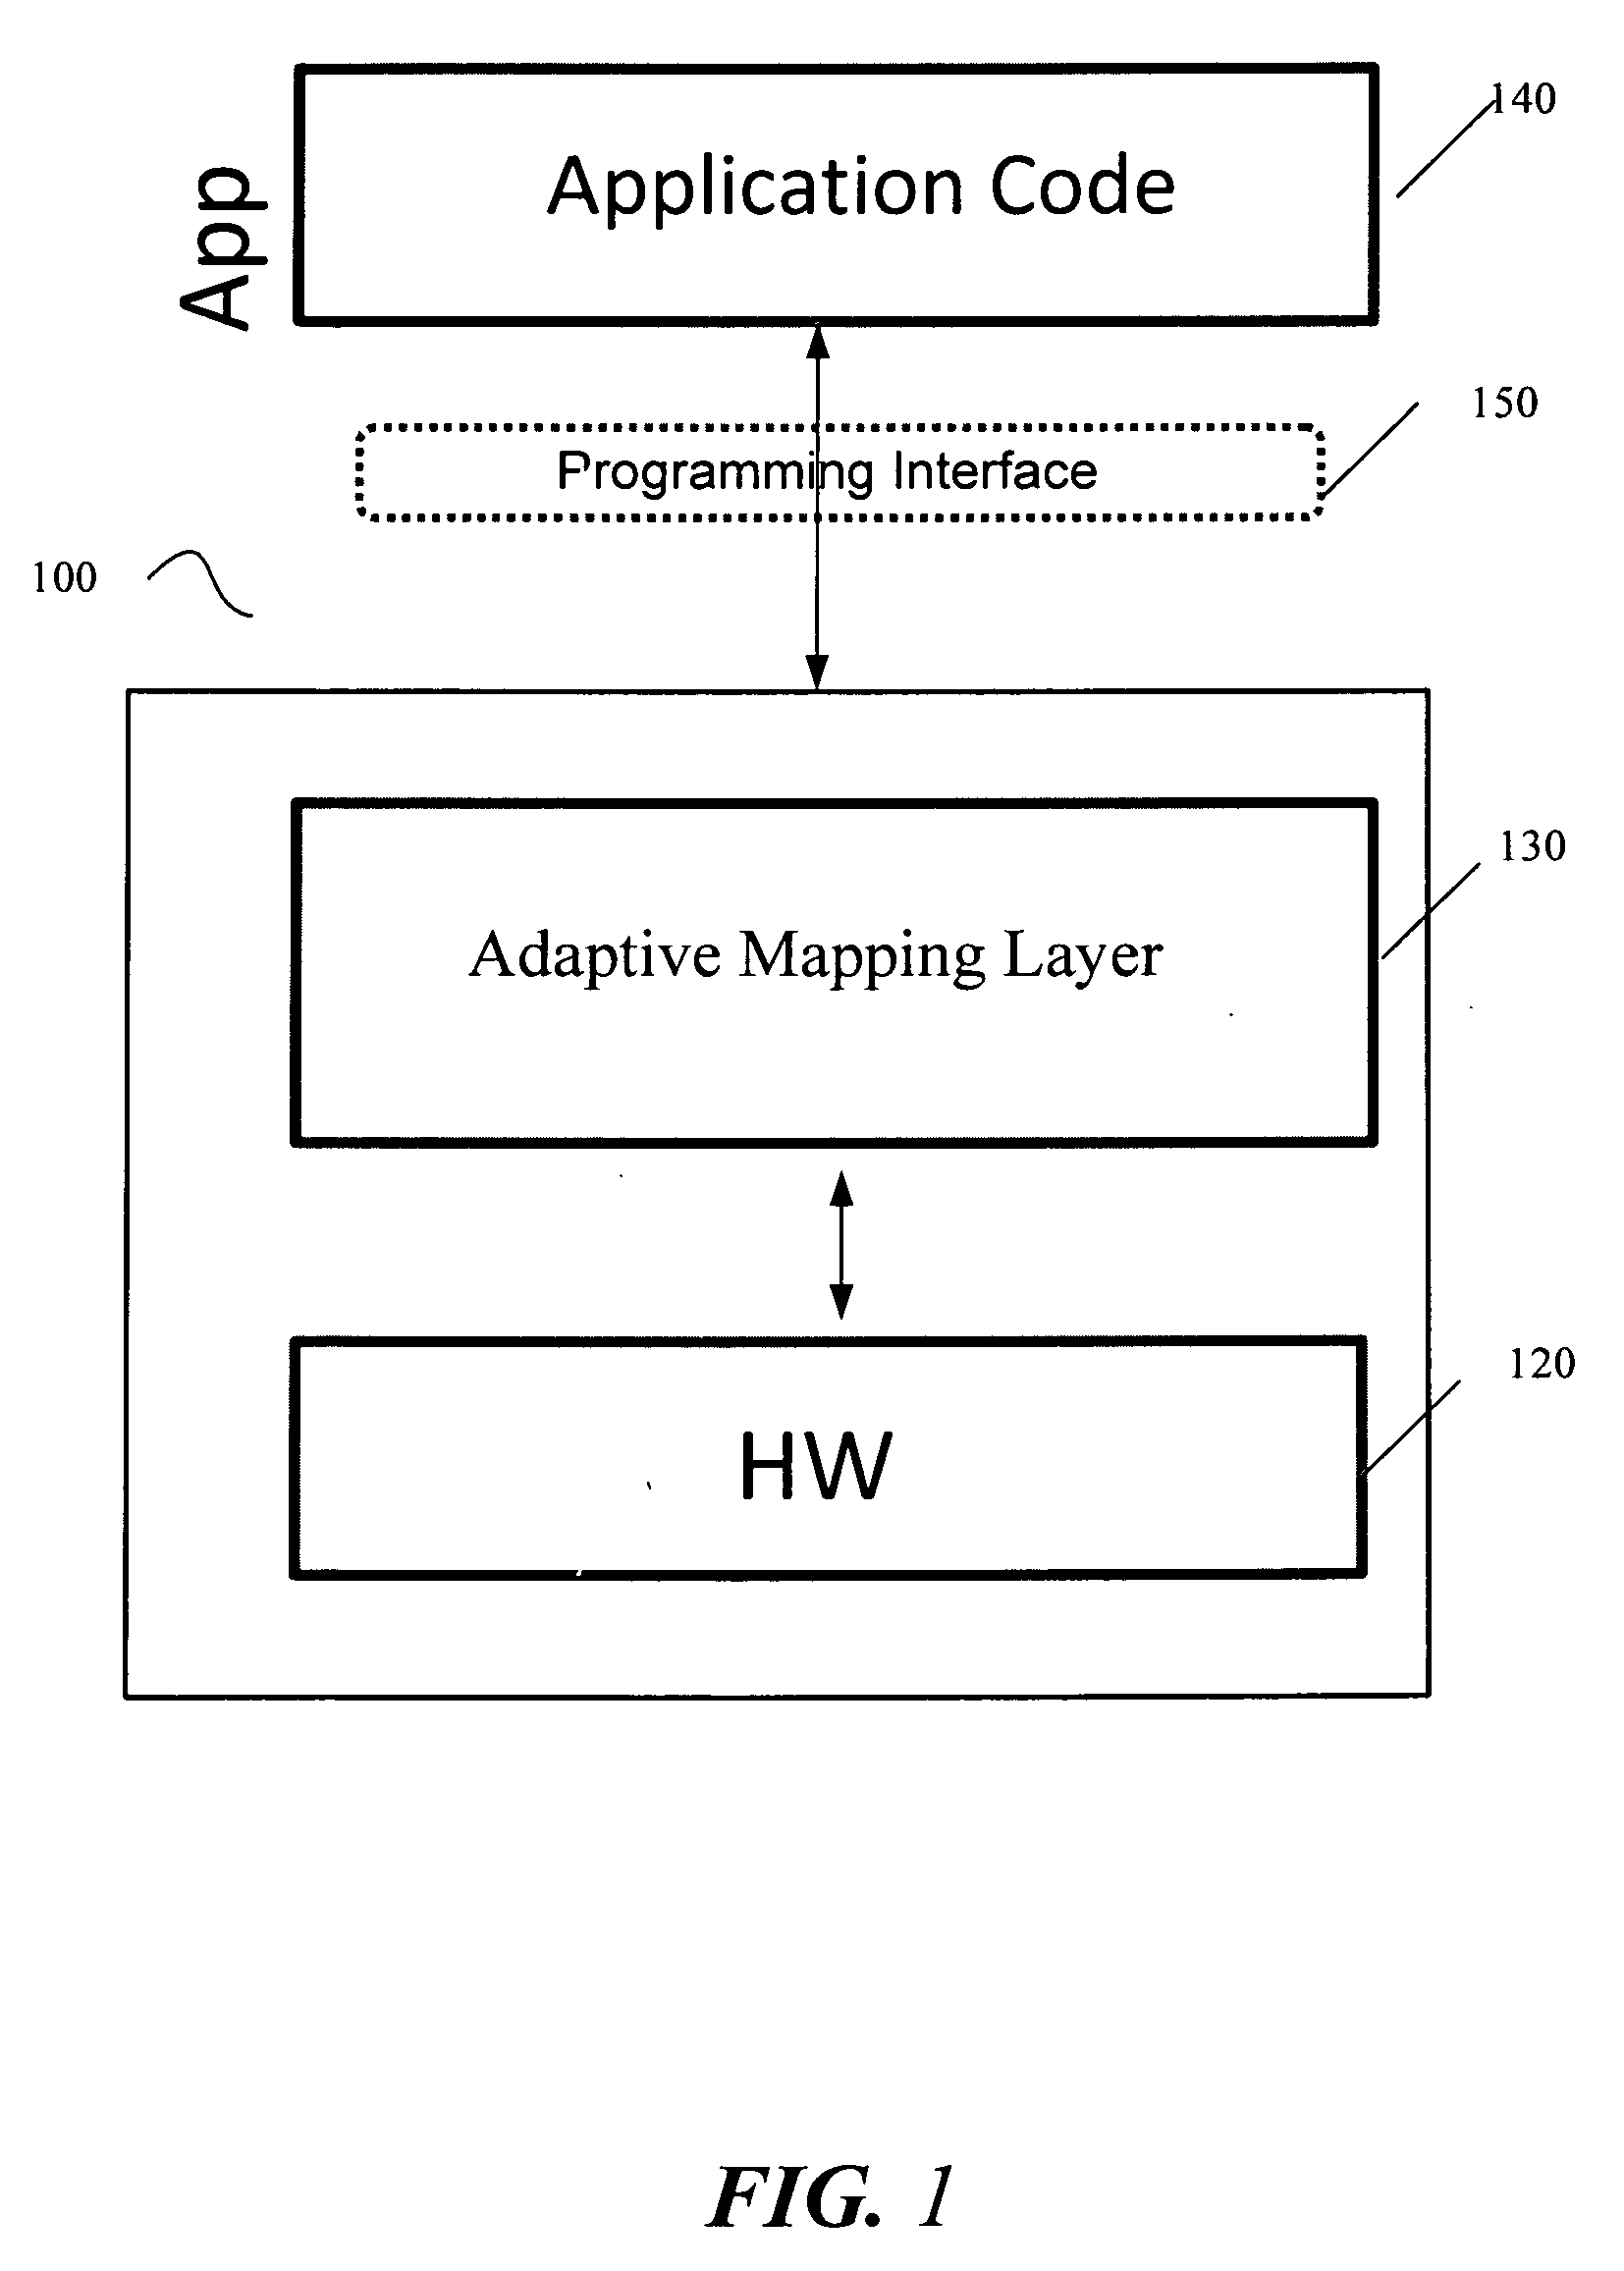 Adaptive mapping for heterogeneous processing systems